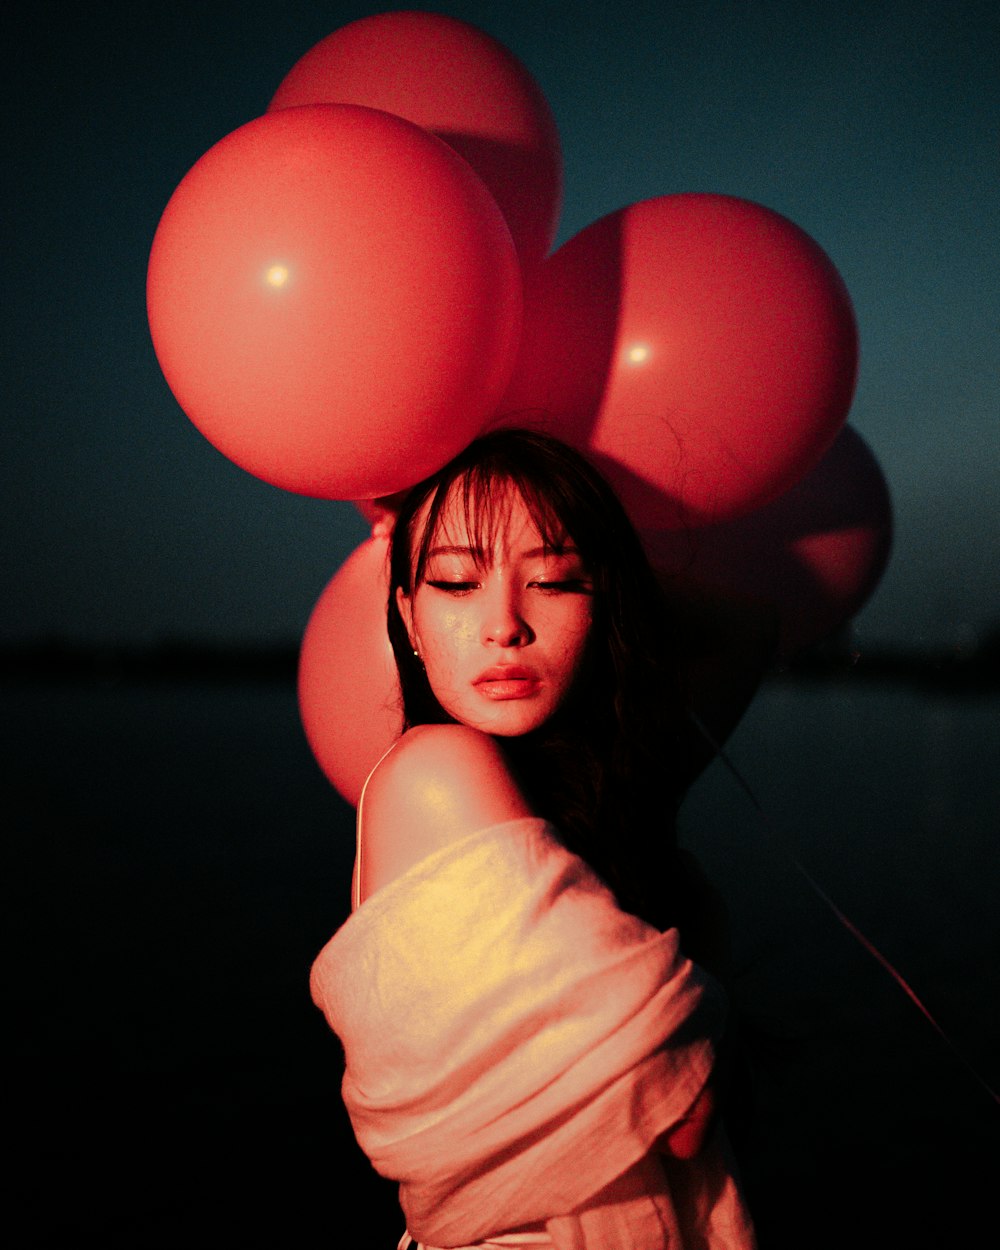 a woman holding a bunch of red balloons